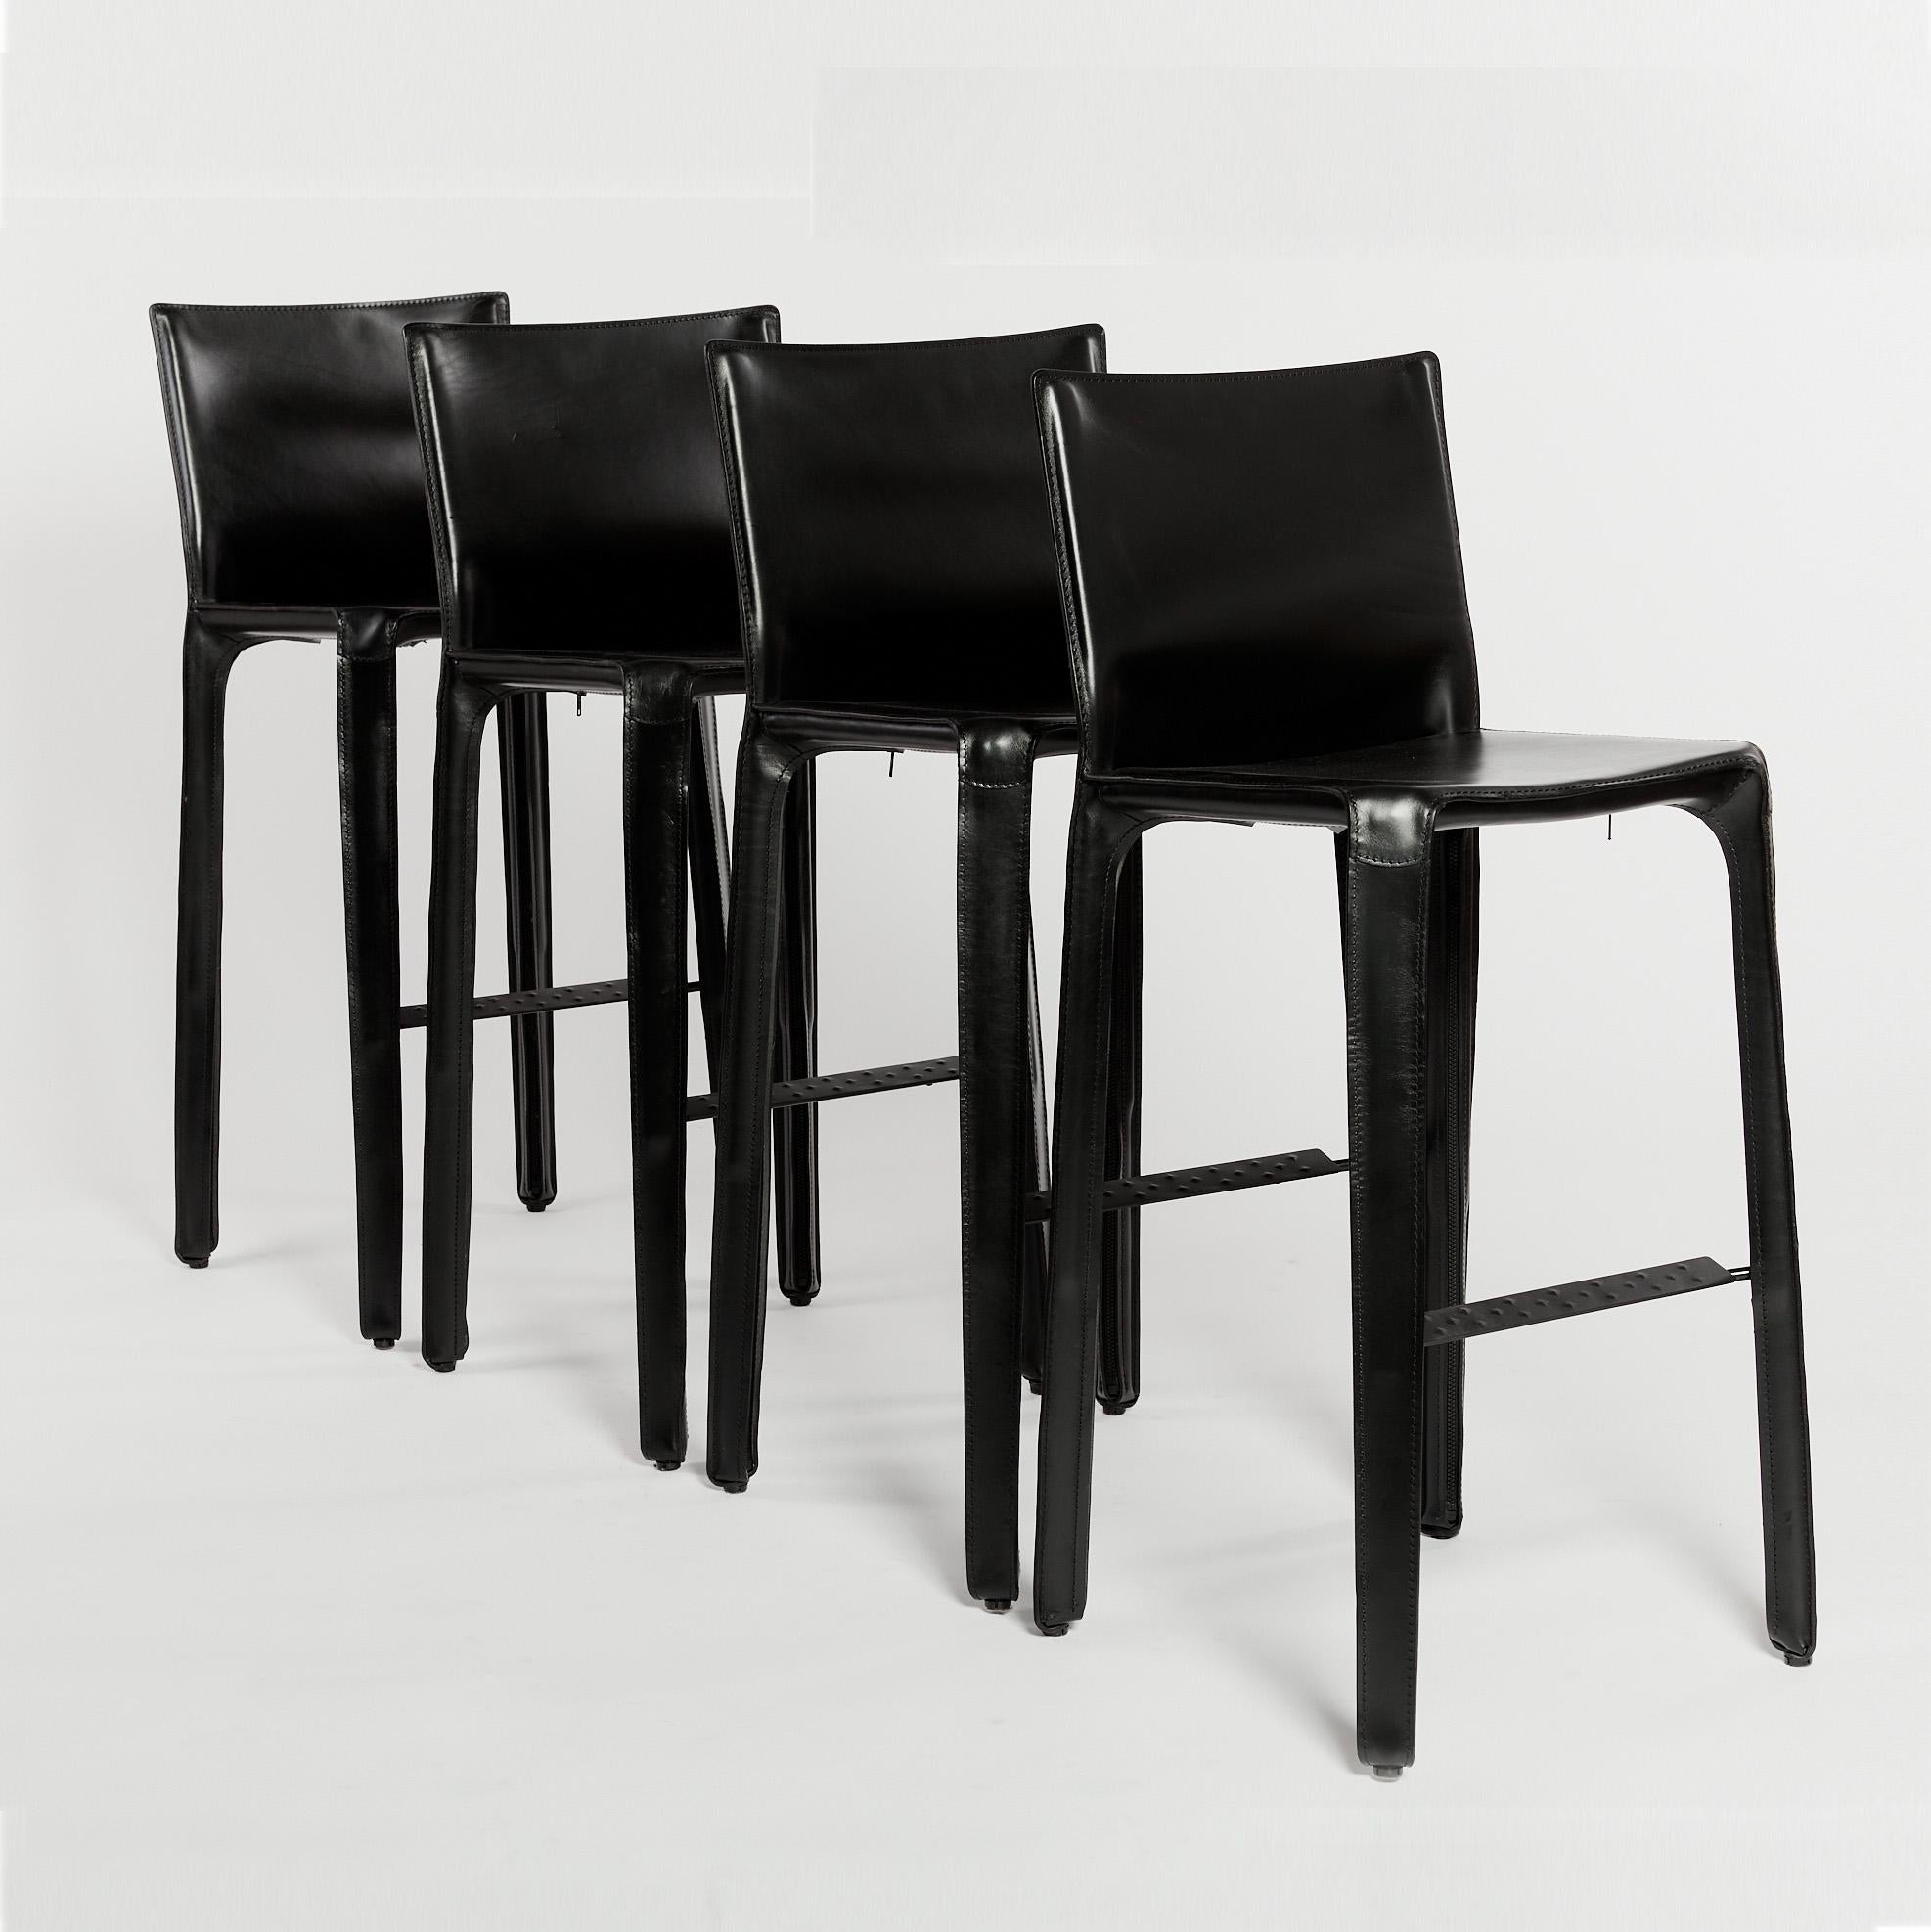 Mario Bellini CAB bar stools in black leather. Includes original labels and embossed logo on the base.

Made with a lengthy thinning process of the leather, the cut parts are stitched together, while the upholstery is hand-fitted to the steel